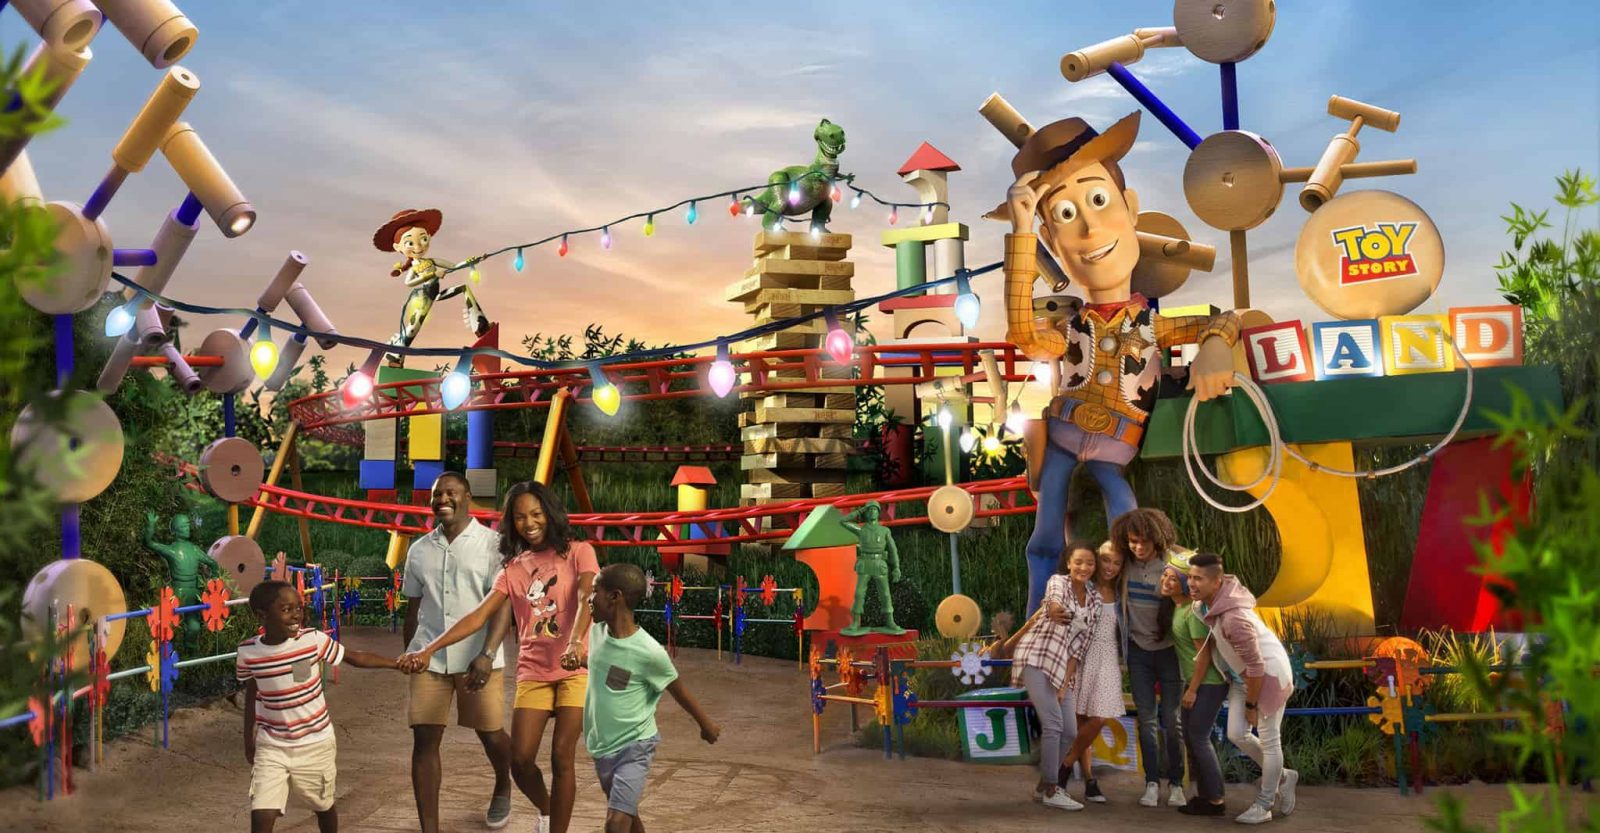 Which Disney Character Are You? toy story land woody 16x9